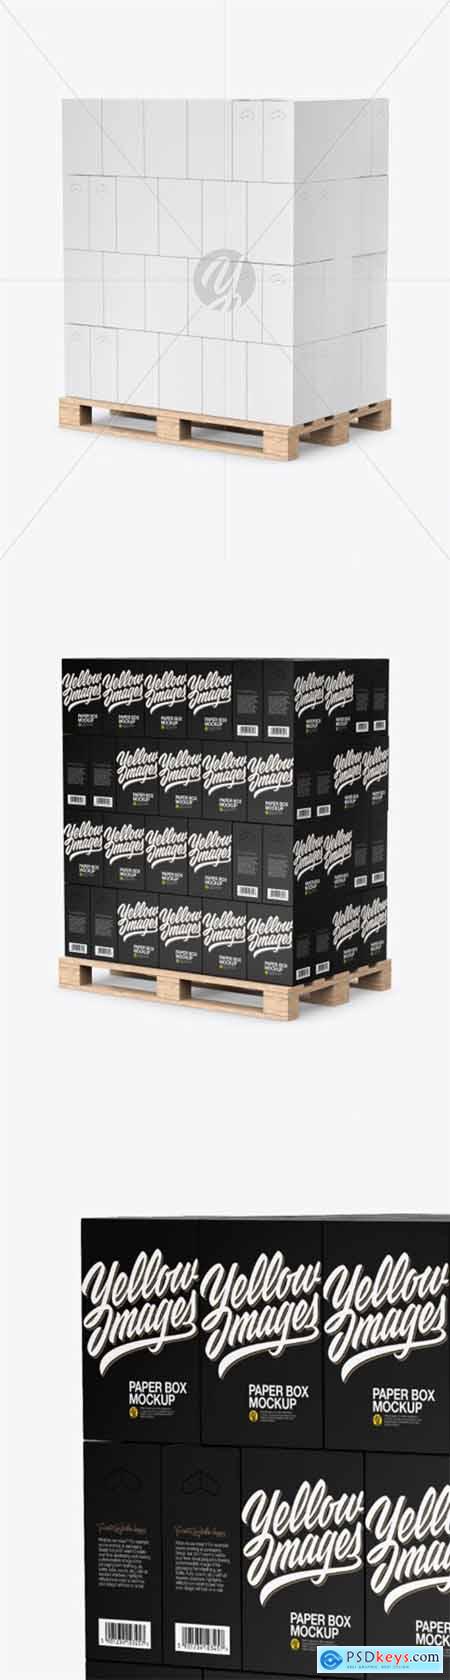 Wooden Pallet With Paper Boxes Mockup 51652